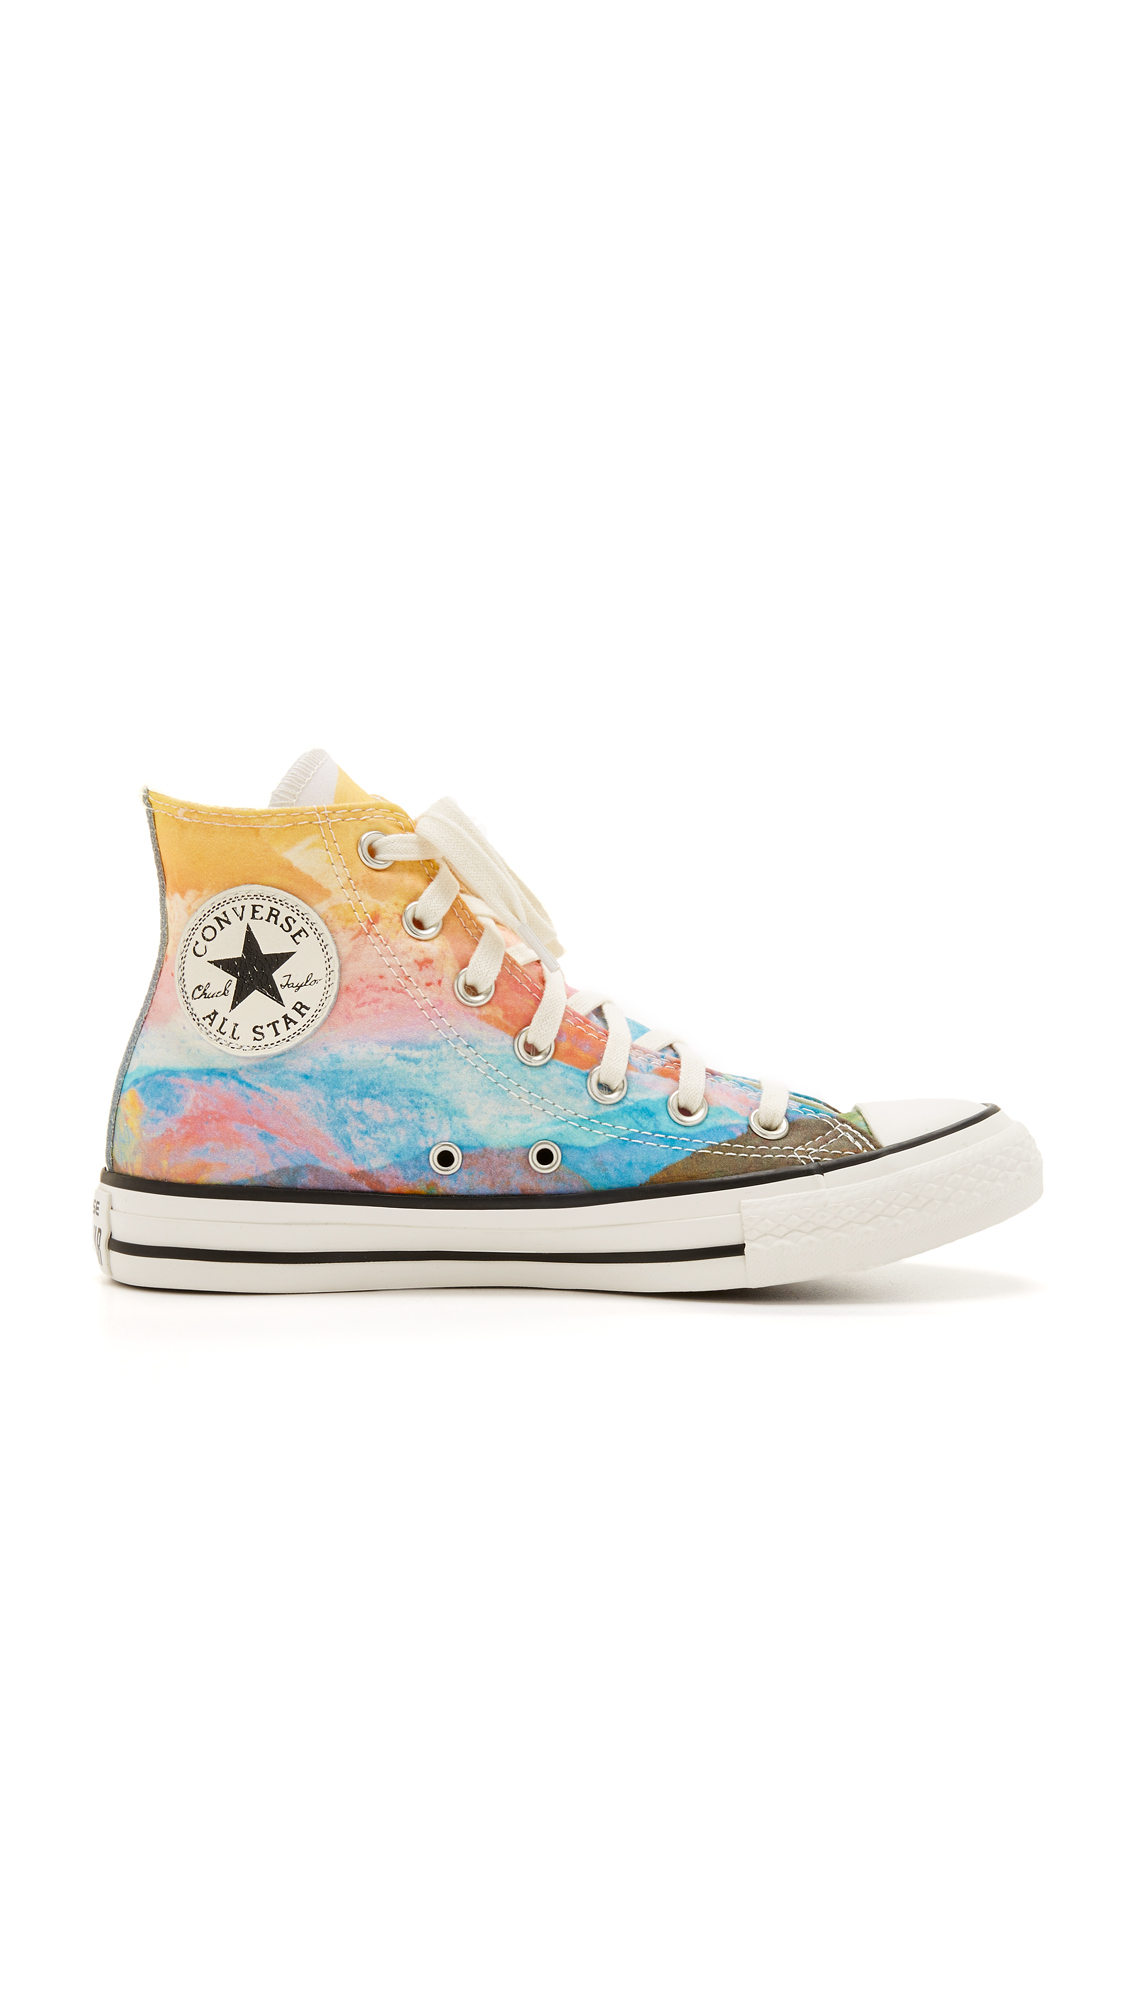 Converse Chuck Taylor All Star Photo Reel Sunset Sneakers in Orange | Lyst